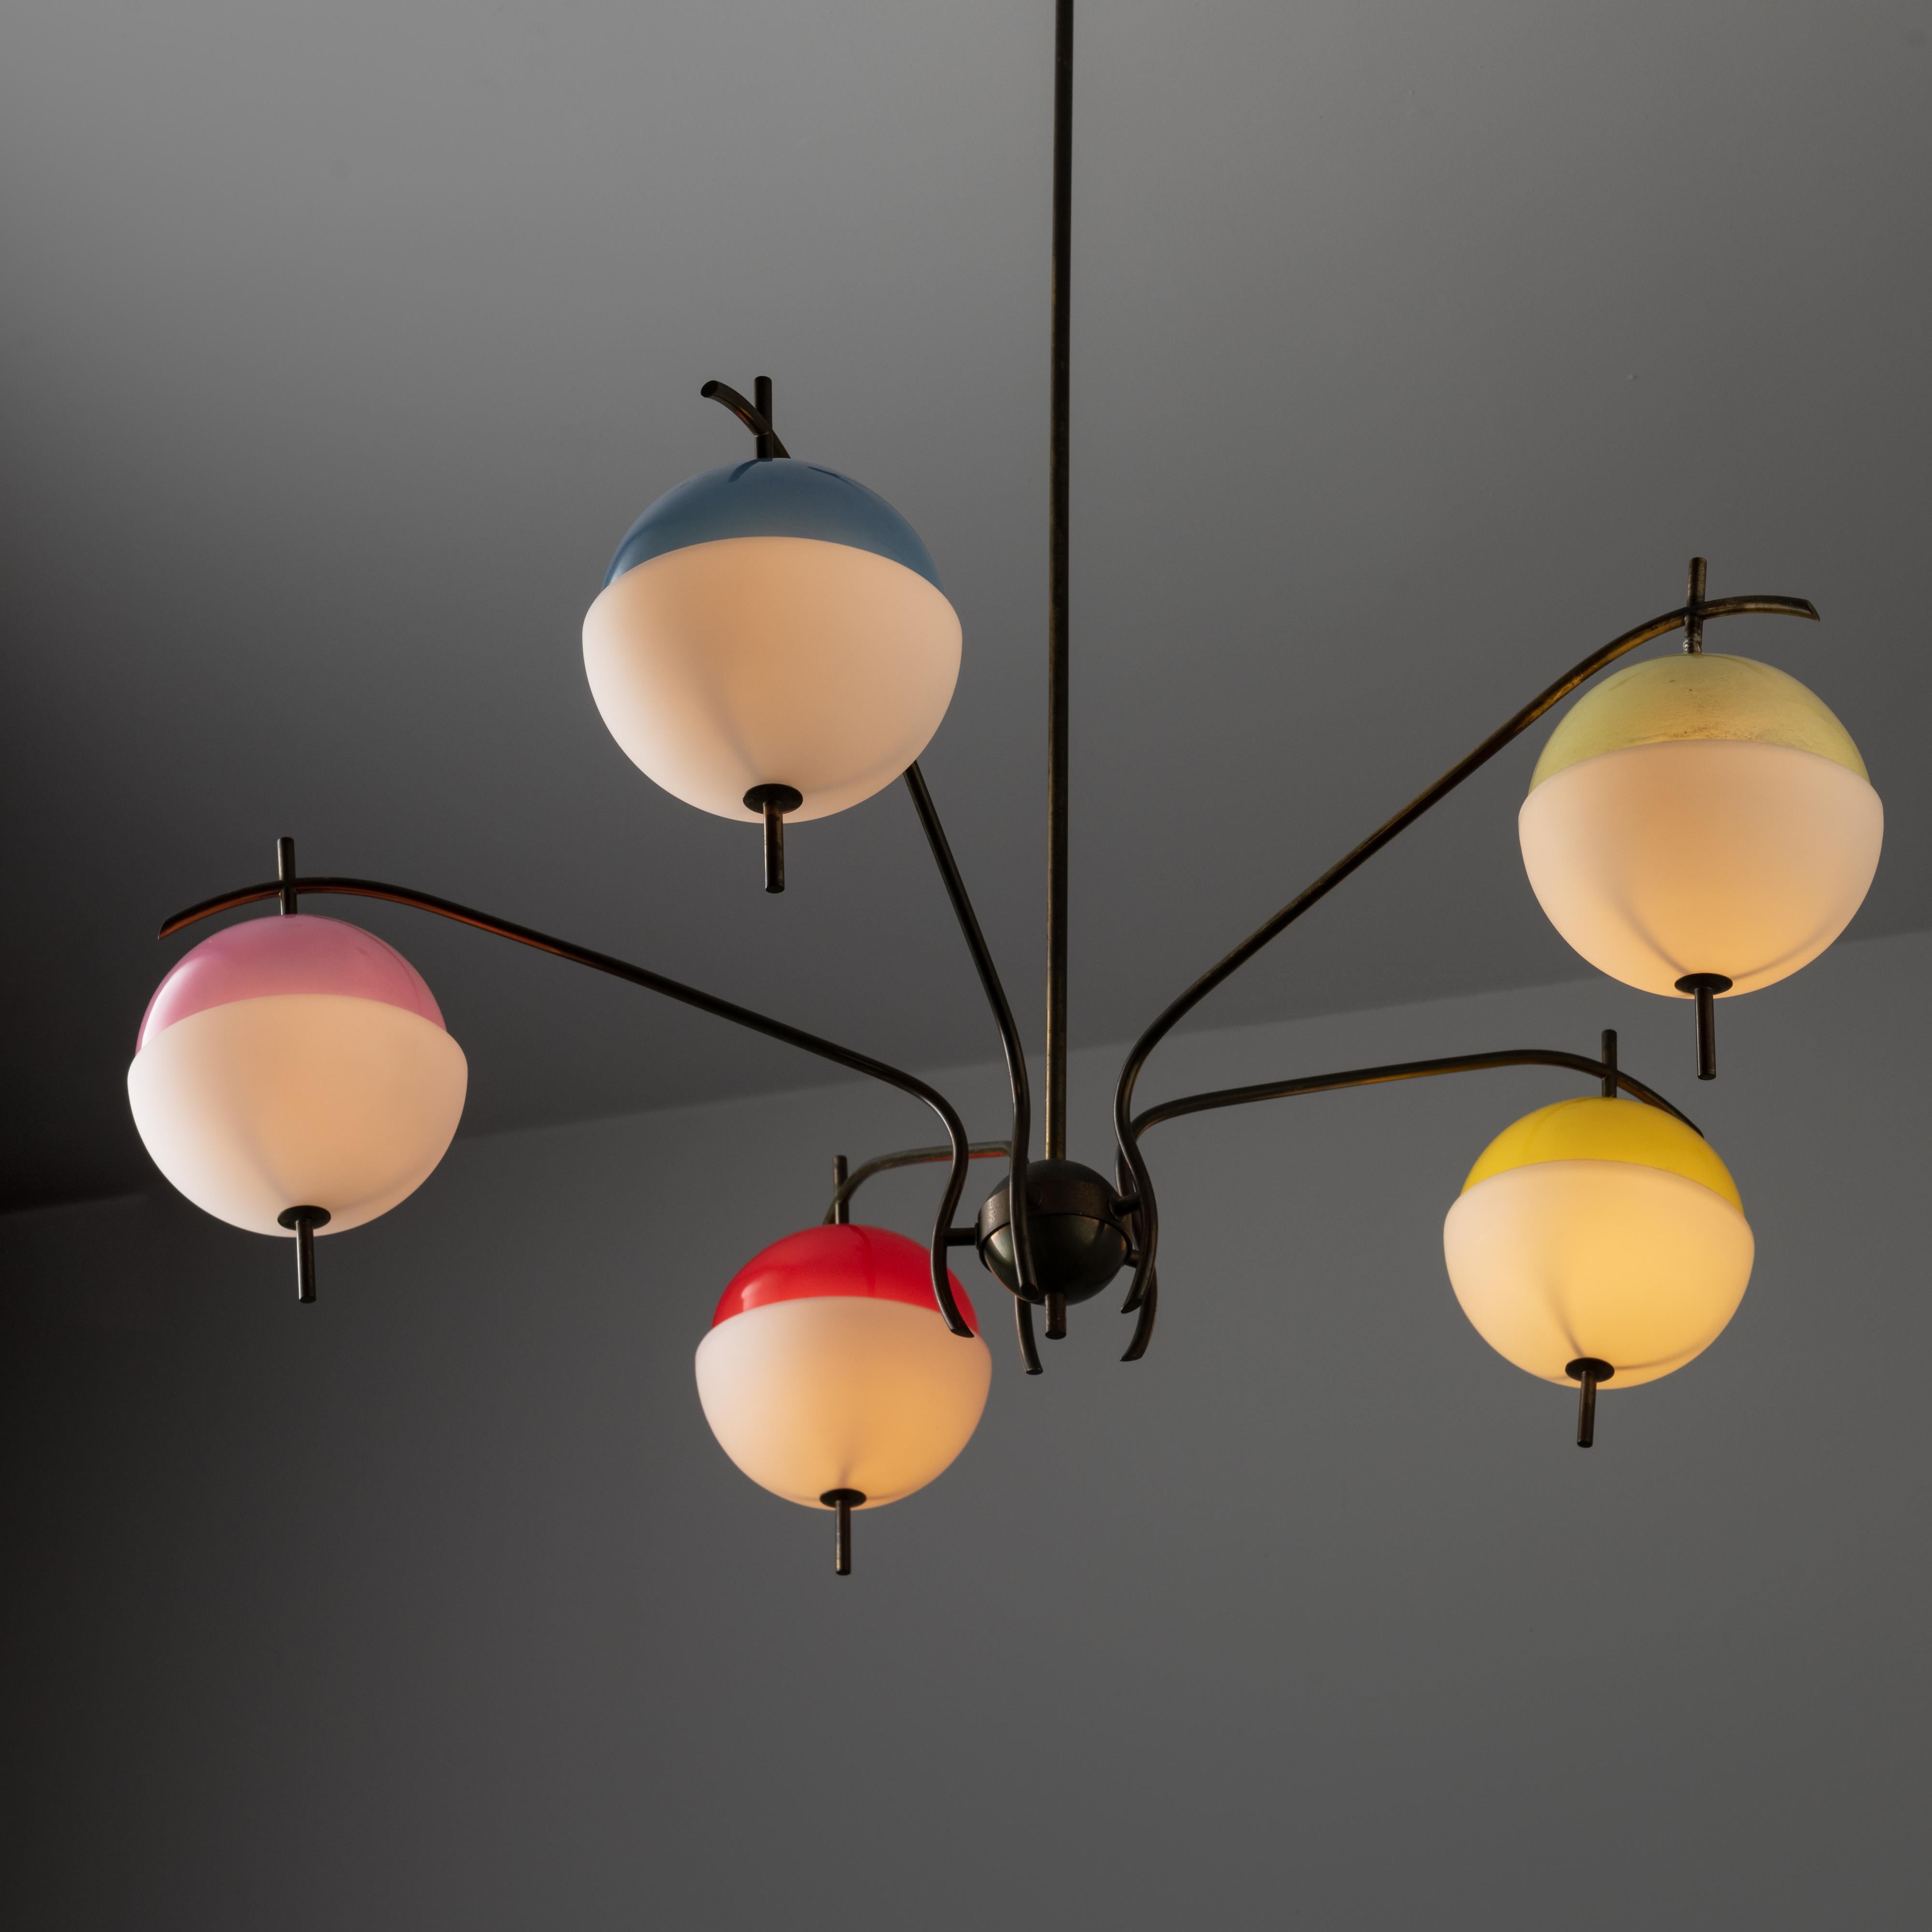 Rare Chandelier by Angelo Lelli for Arredoluce. Designed and manufactured in Italy, circa 1950. Five-arm chandelier with colorful acrylic top half shades and opaline glass bottom diffusers. An almost gothic approach, paired with the playful colors